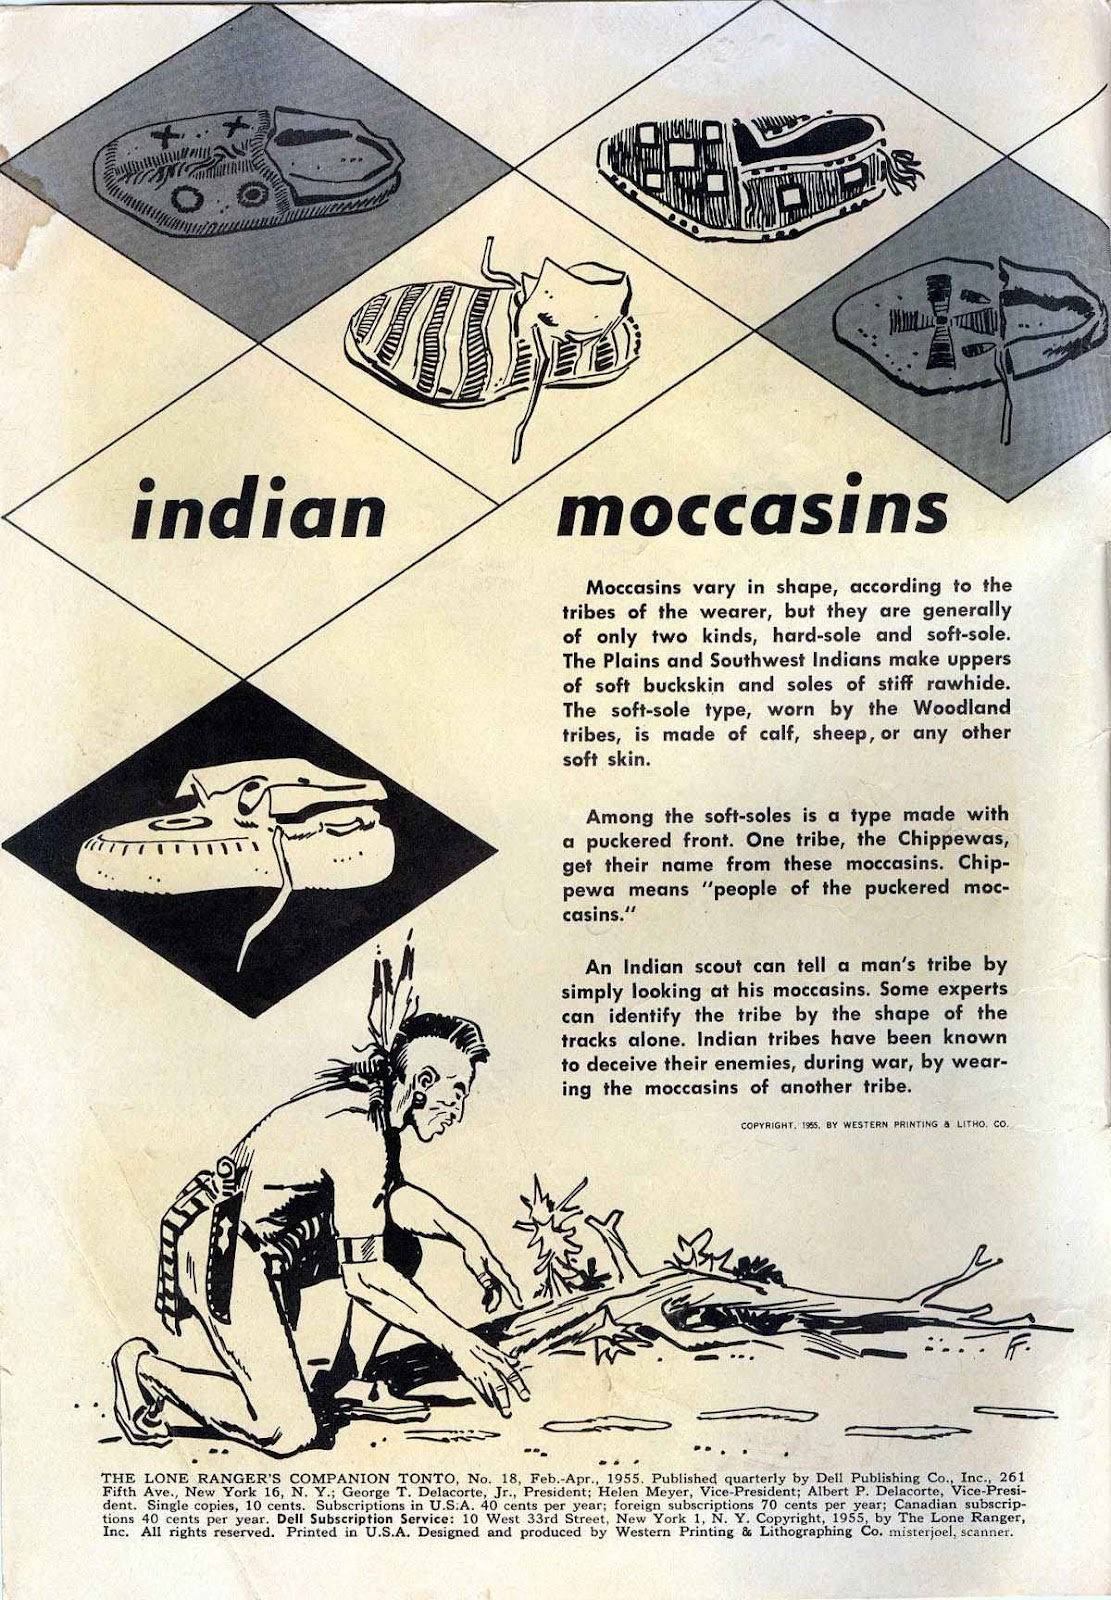 Moccasins erotic meaning